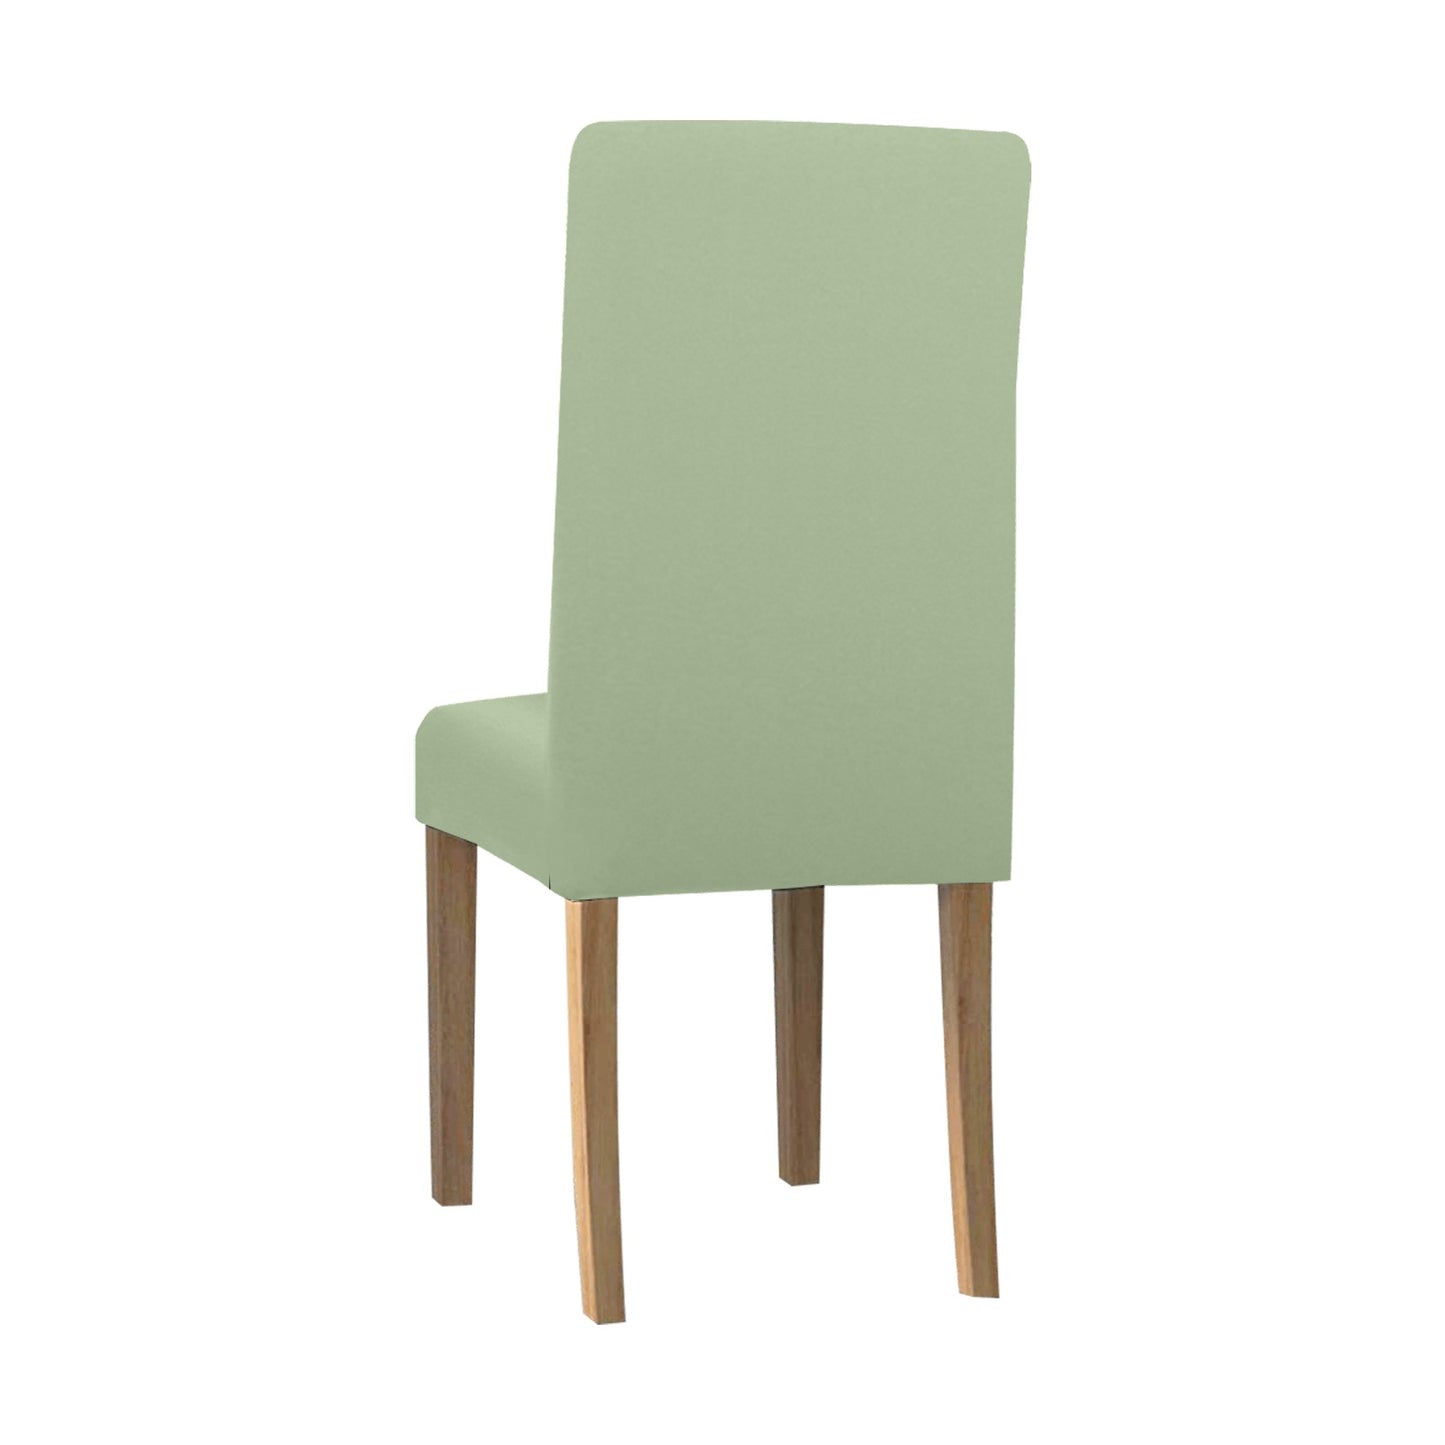 Sage Green Dining Chair Seat Covers, Light Olive Solid Color Stretch Slipcover Furniture Dining Room Party Banquet Home Decor Starcove Fashion